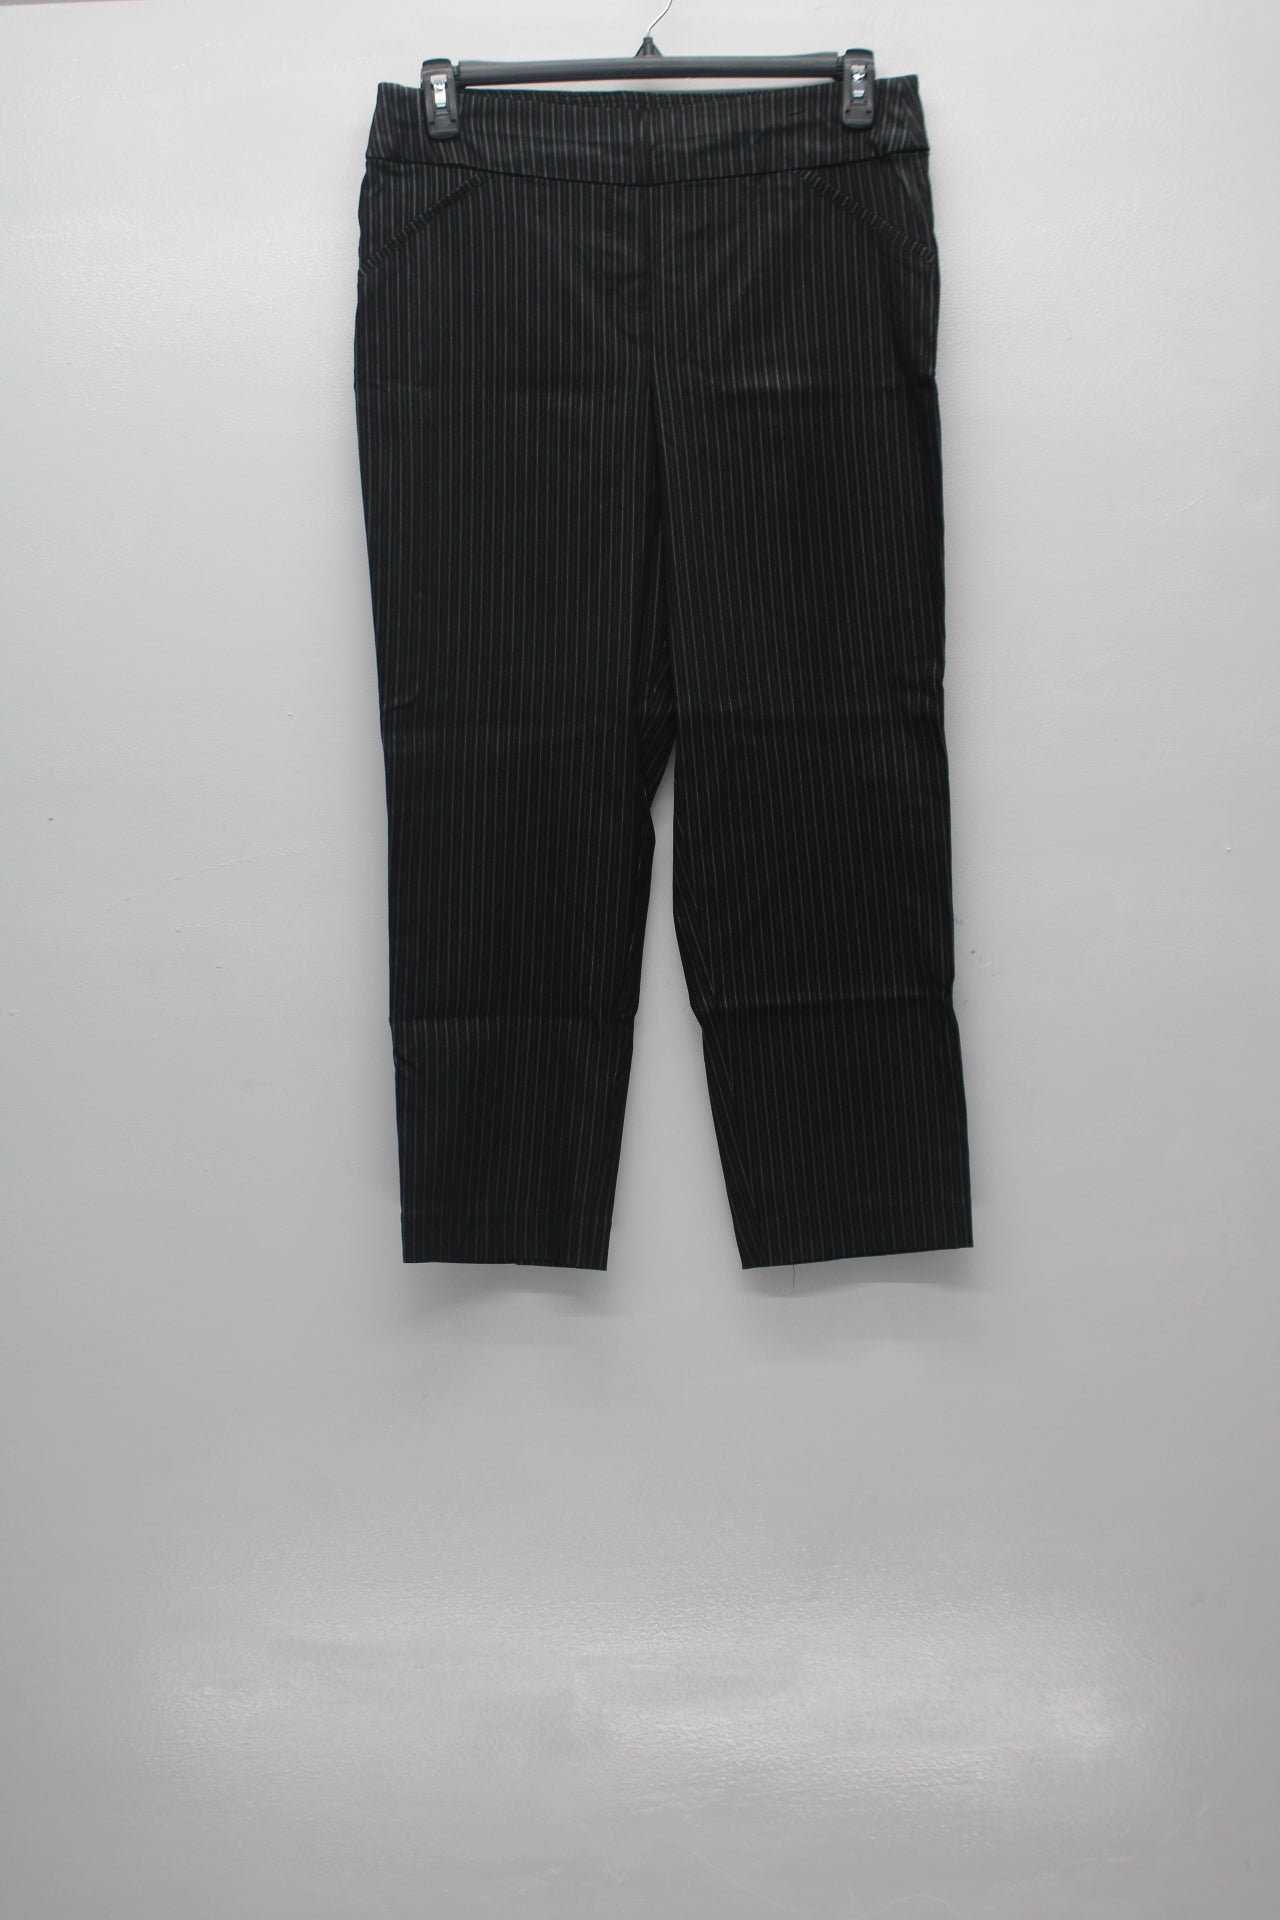 Alfred Dunner Petite Theater District Pinstripe Pants Black 10P